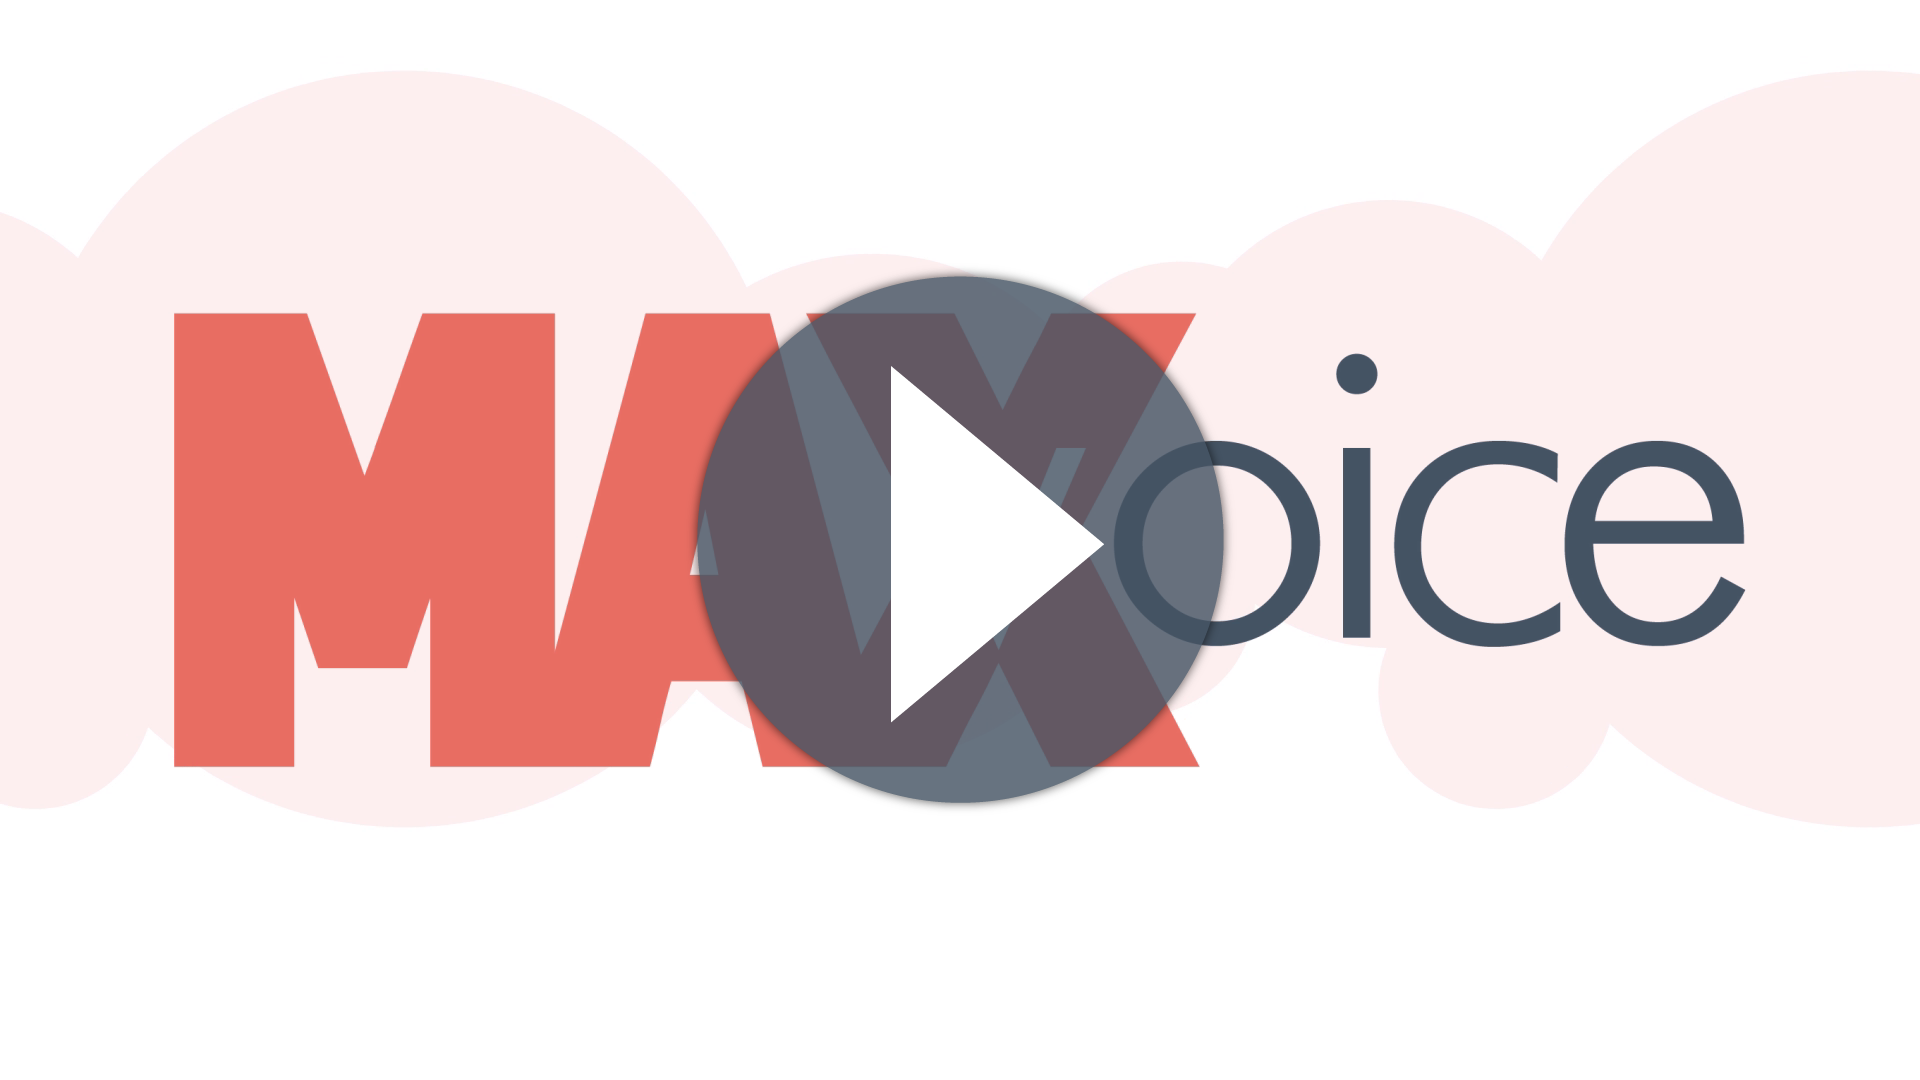 Click Here to view our MAXvoice introduction video